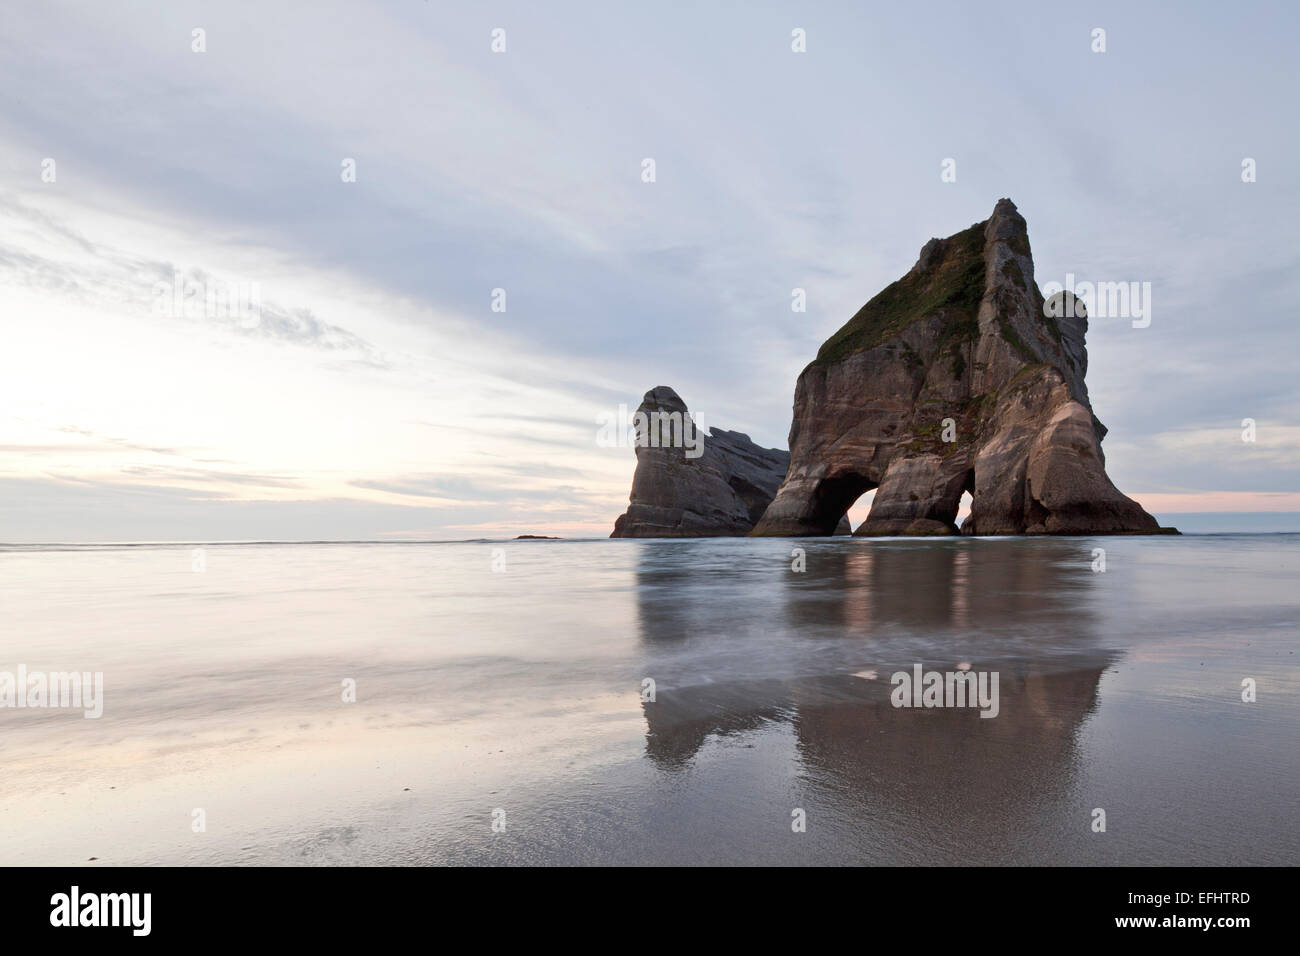 Archway Islands and beach at low tide, Reflection in the water, Wharariki Beach, South Island, New Zealand Stock Photo